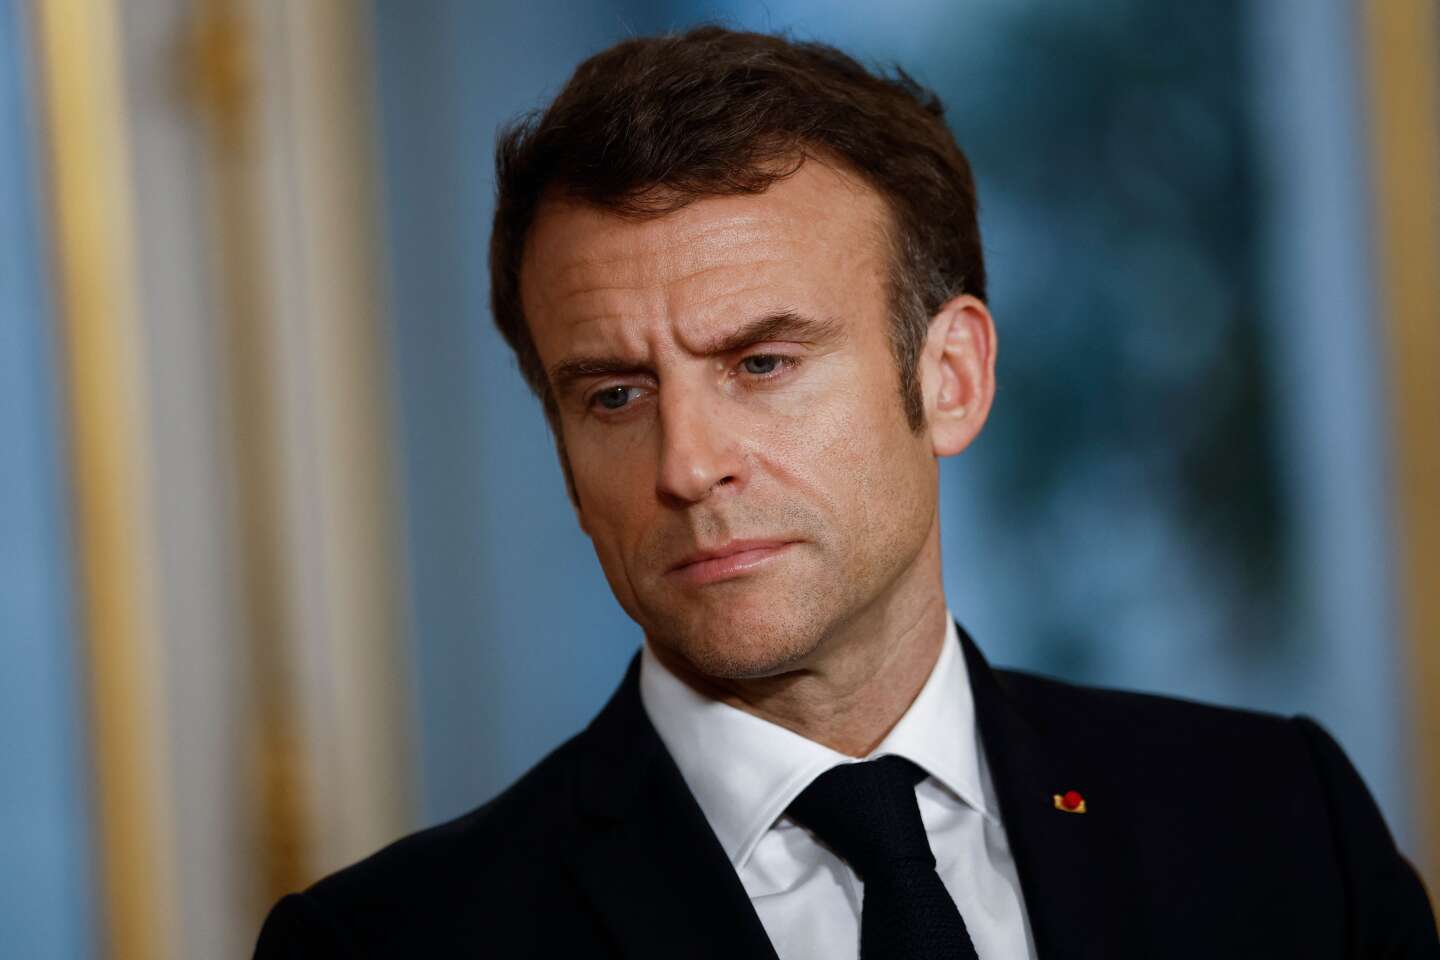 renew the dialogue while remaining inflexible, the paradox of Emmanuel Macron